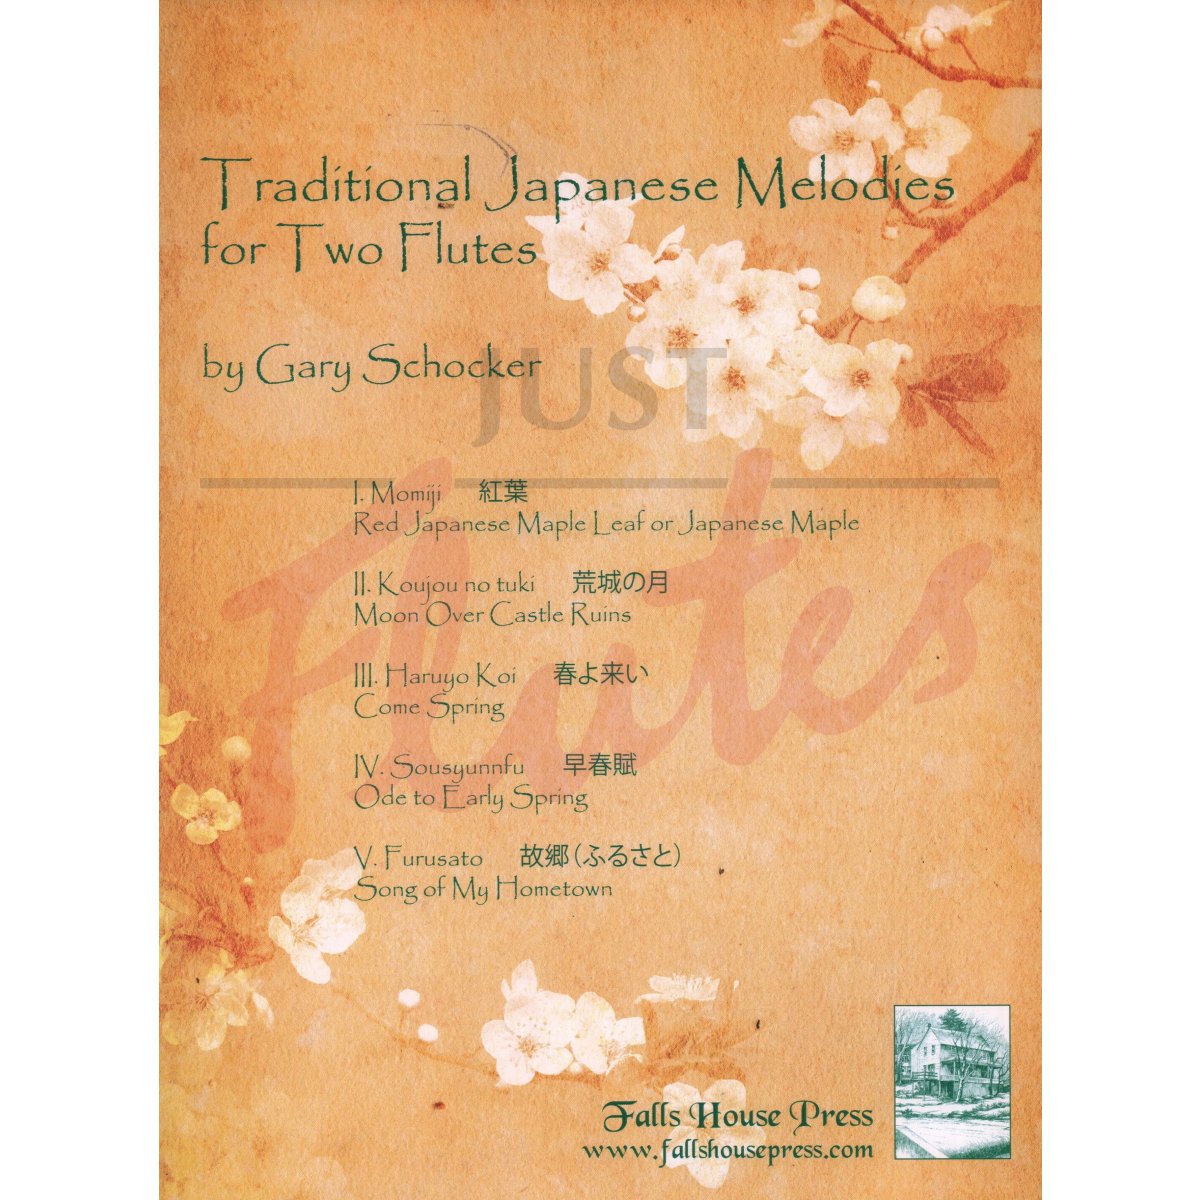 Traditional Japanese Melodies for Two Flutes